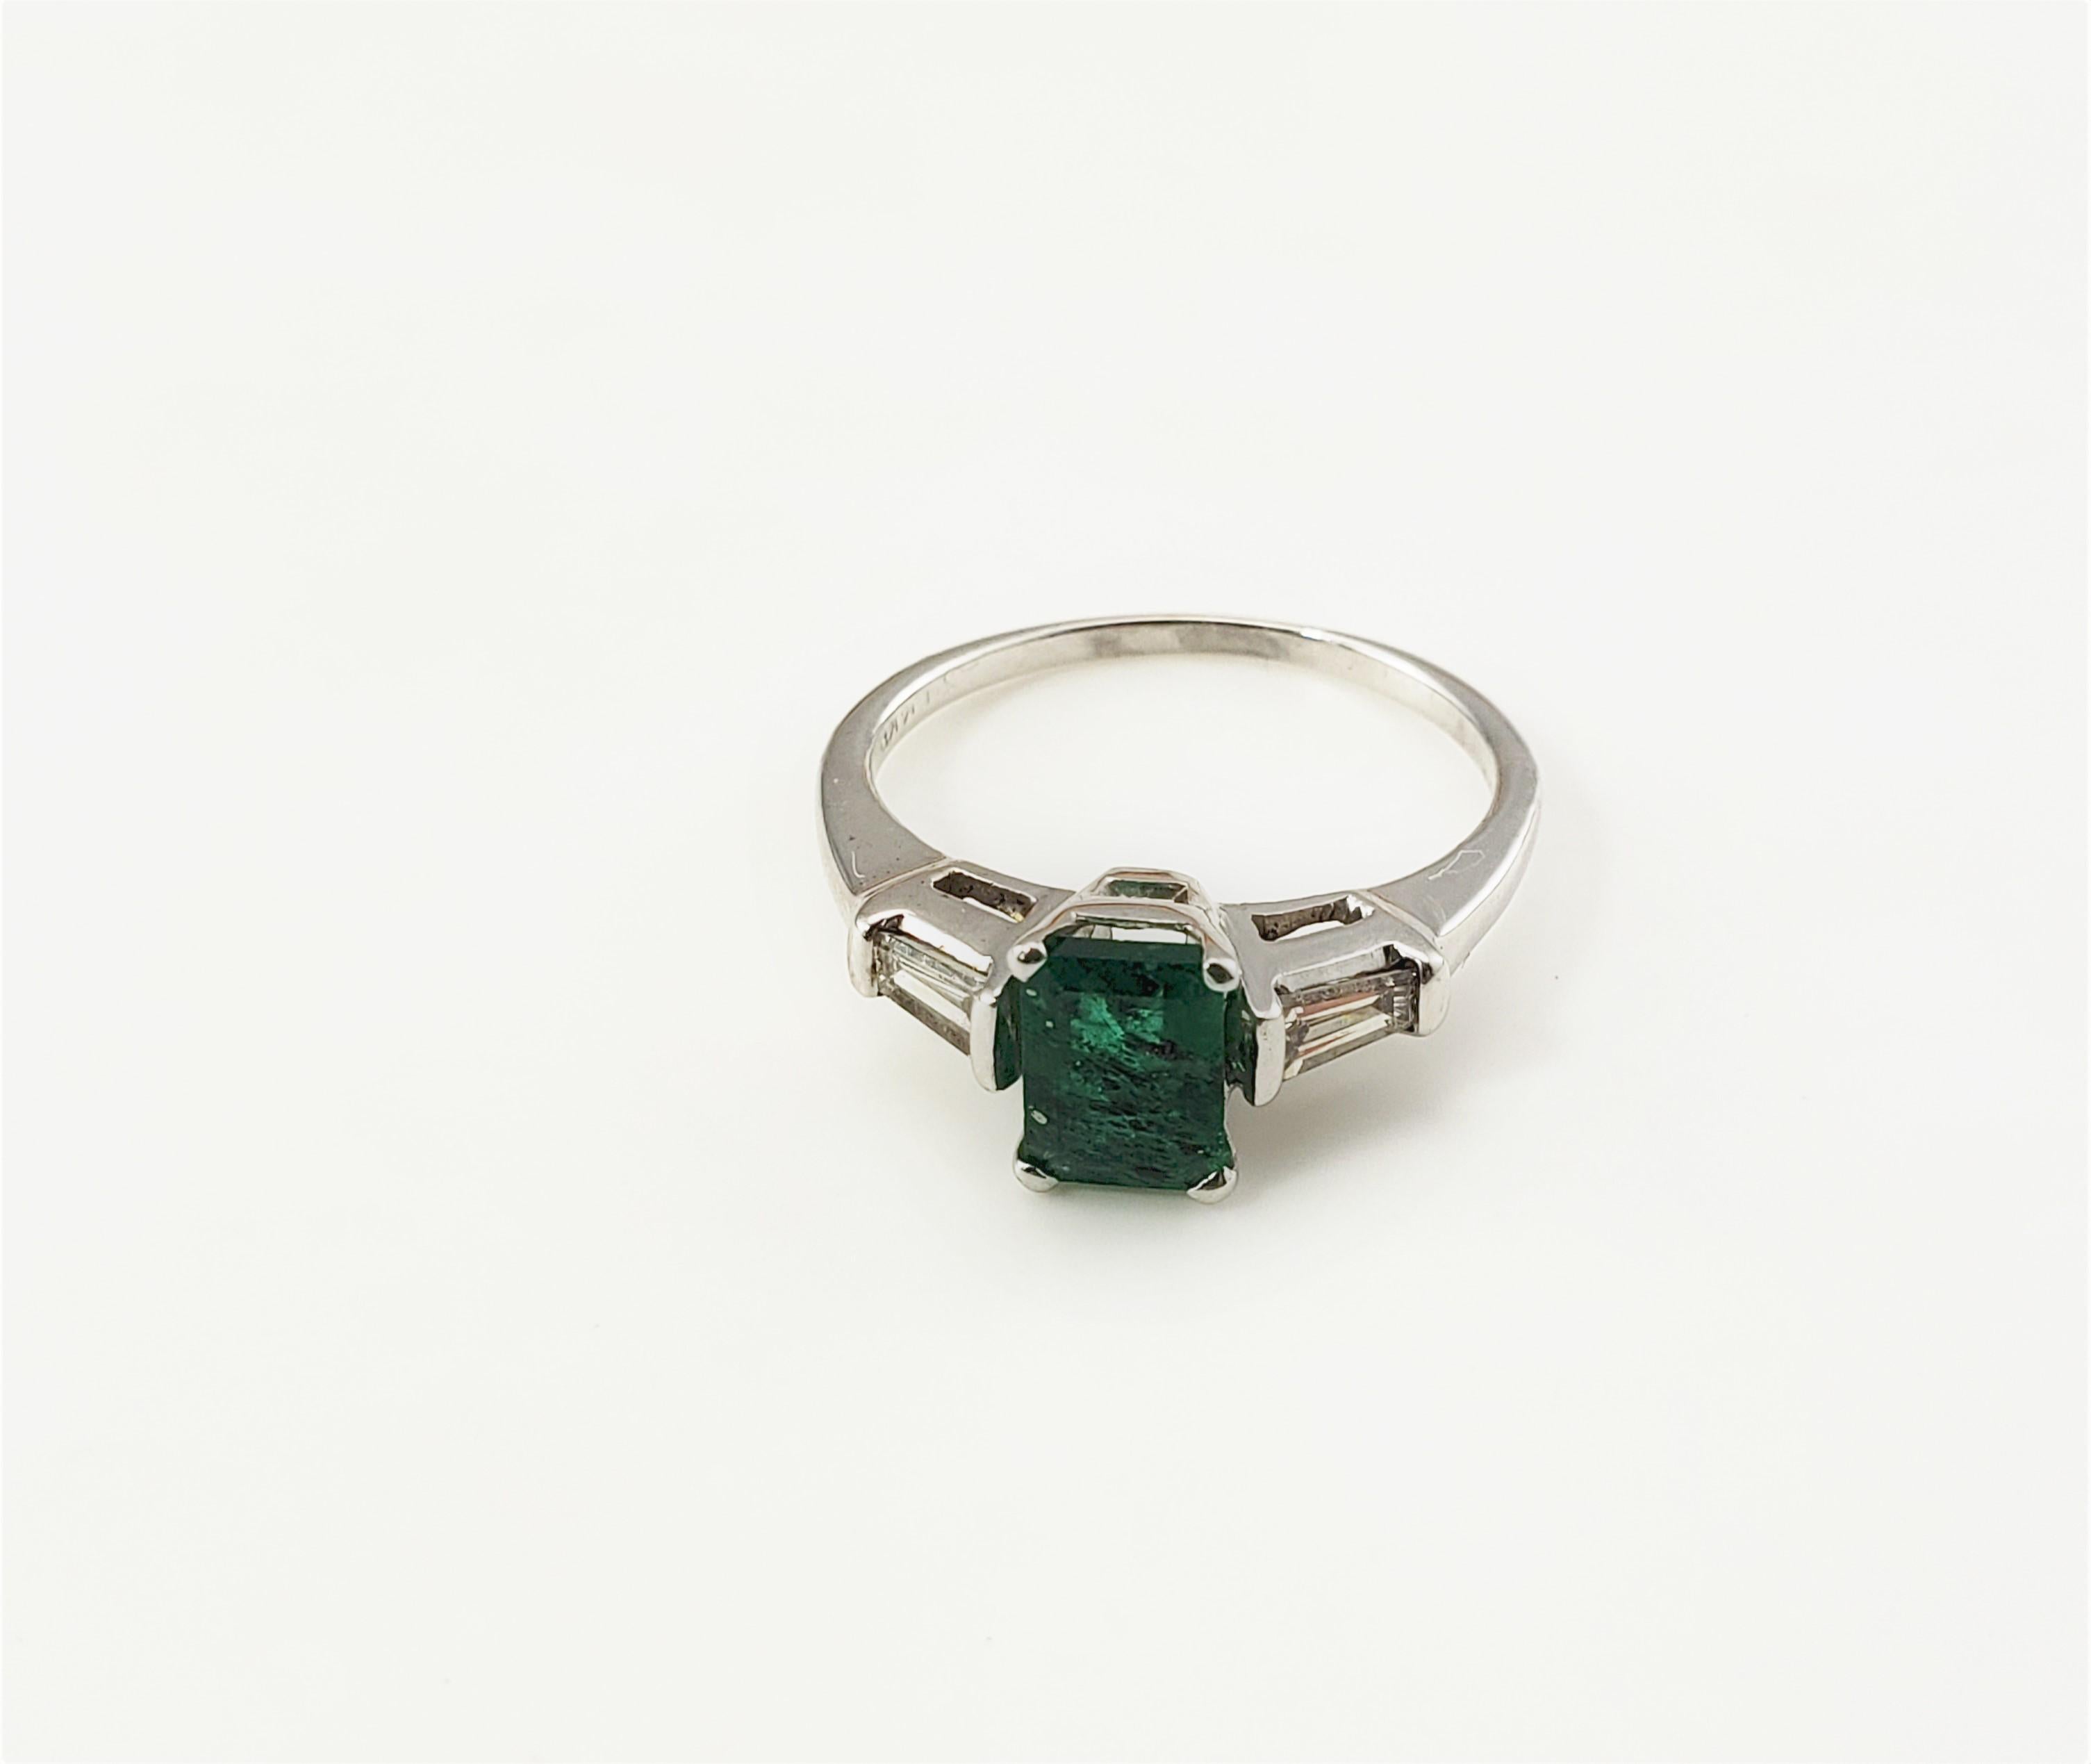 14 Karat White Emerald and Diamond Ring Size 6.25-

This lovely ring features one emerald cut green emerald (7 mm x 5 mm) and two baguette diamonds set in classic 14K white gold.  Shank: 1 mm

Emerald weight:  .91 ct.

Total diamond weight:  .30